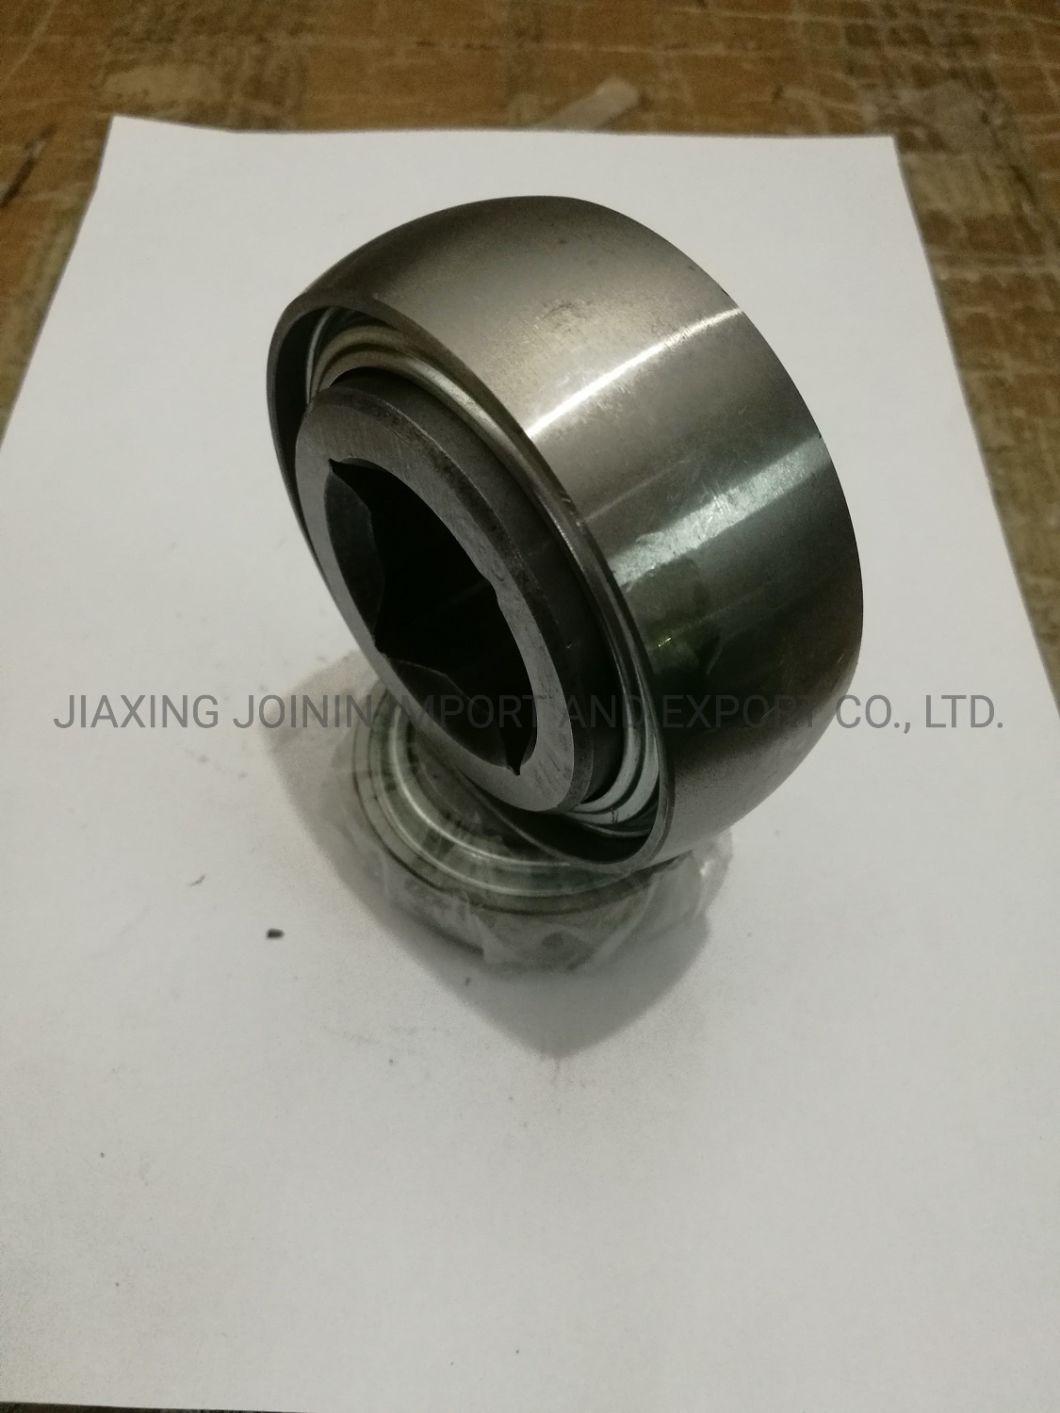 Heavy Duty Square Bore Agricultural Machinery Bearing W211PP3 W211ppb3 W211PP5 W211ppb6 High Quality Non-Relubricable Farm Machinery Bearing